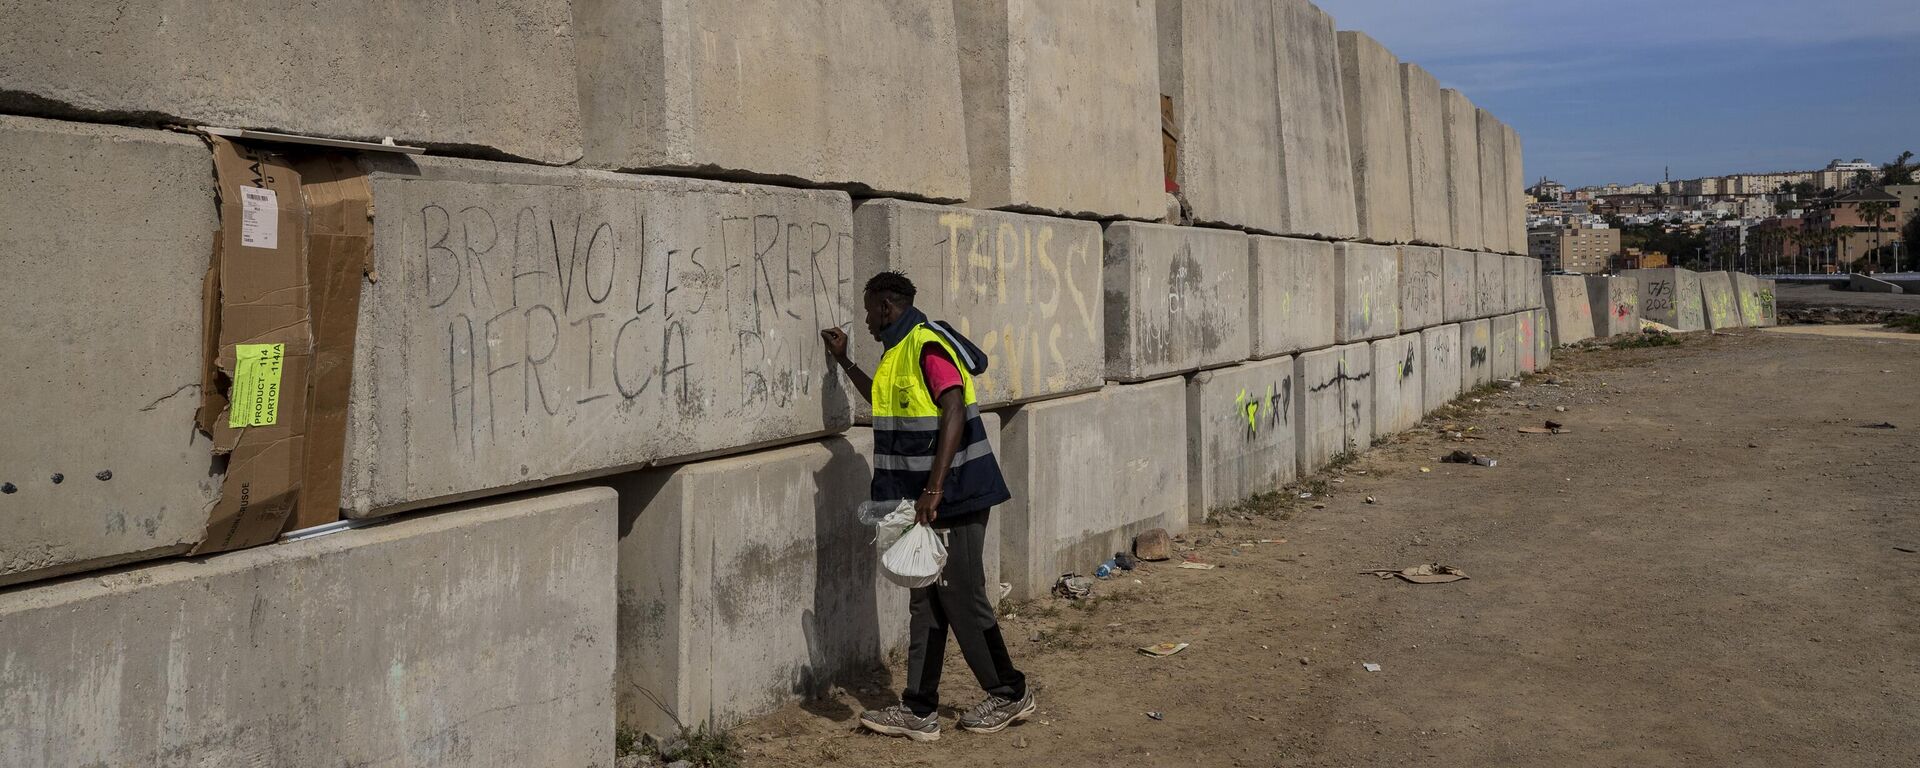 A sub-Saharan migrant writes his name on the breakwater in the Spanish enclave of Ceuta, Friday, May 21, 2021. - Sputnik Africa, 1920, 31.12.2023